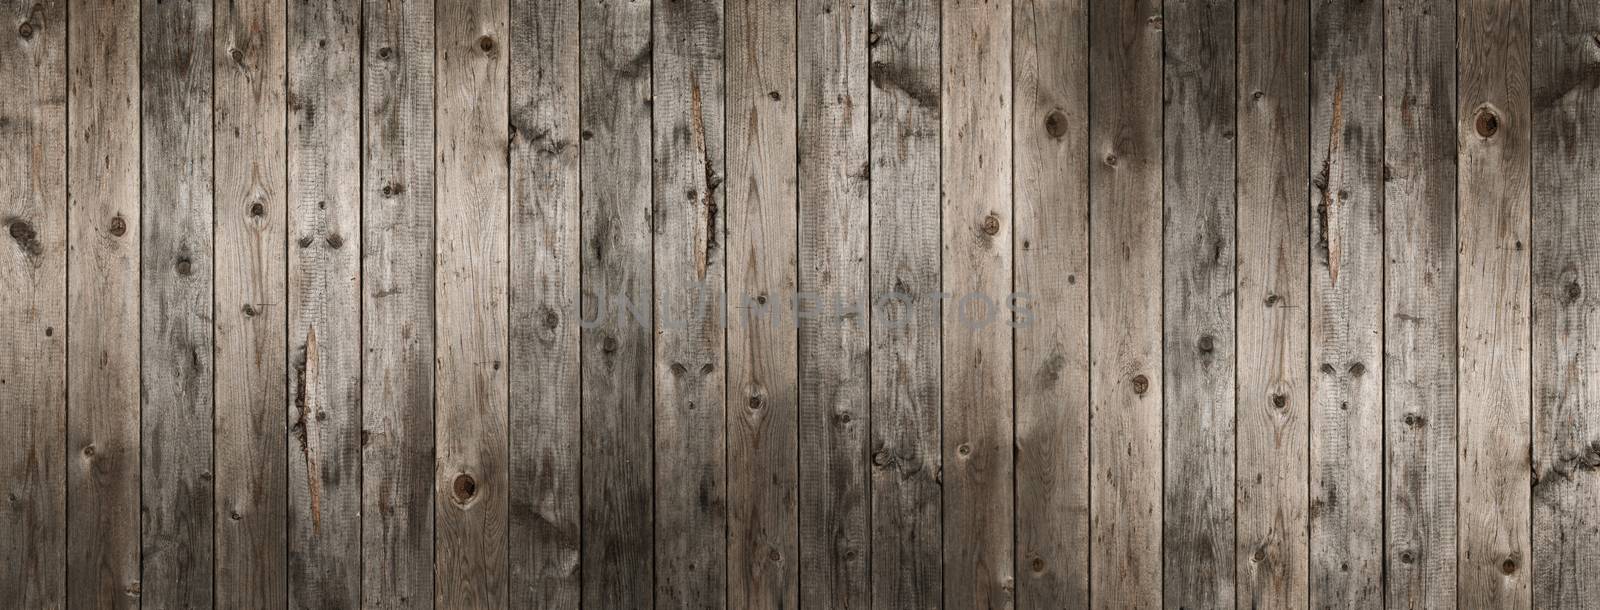 Natural timber background by szefei